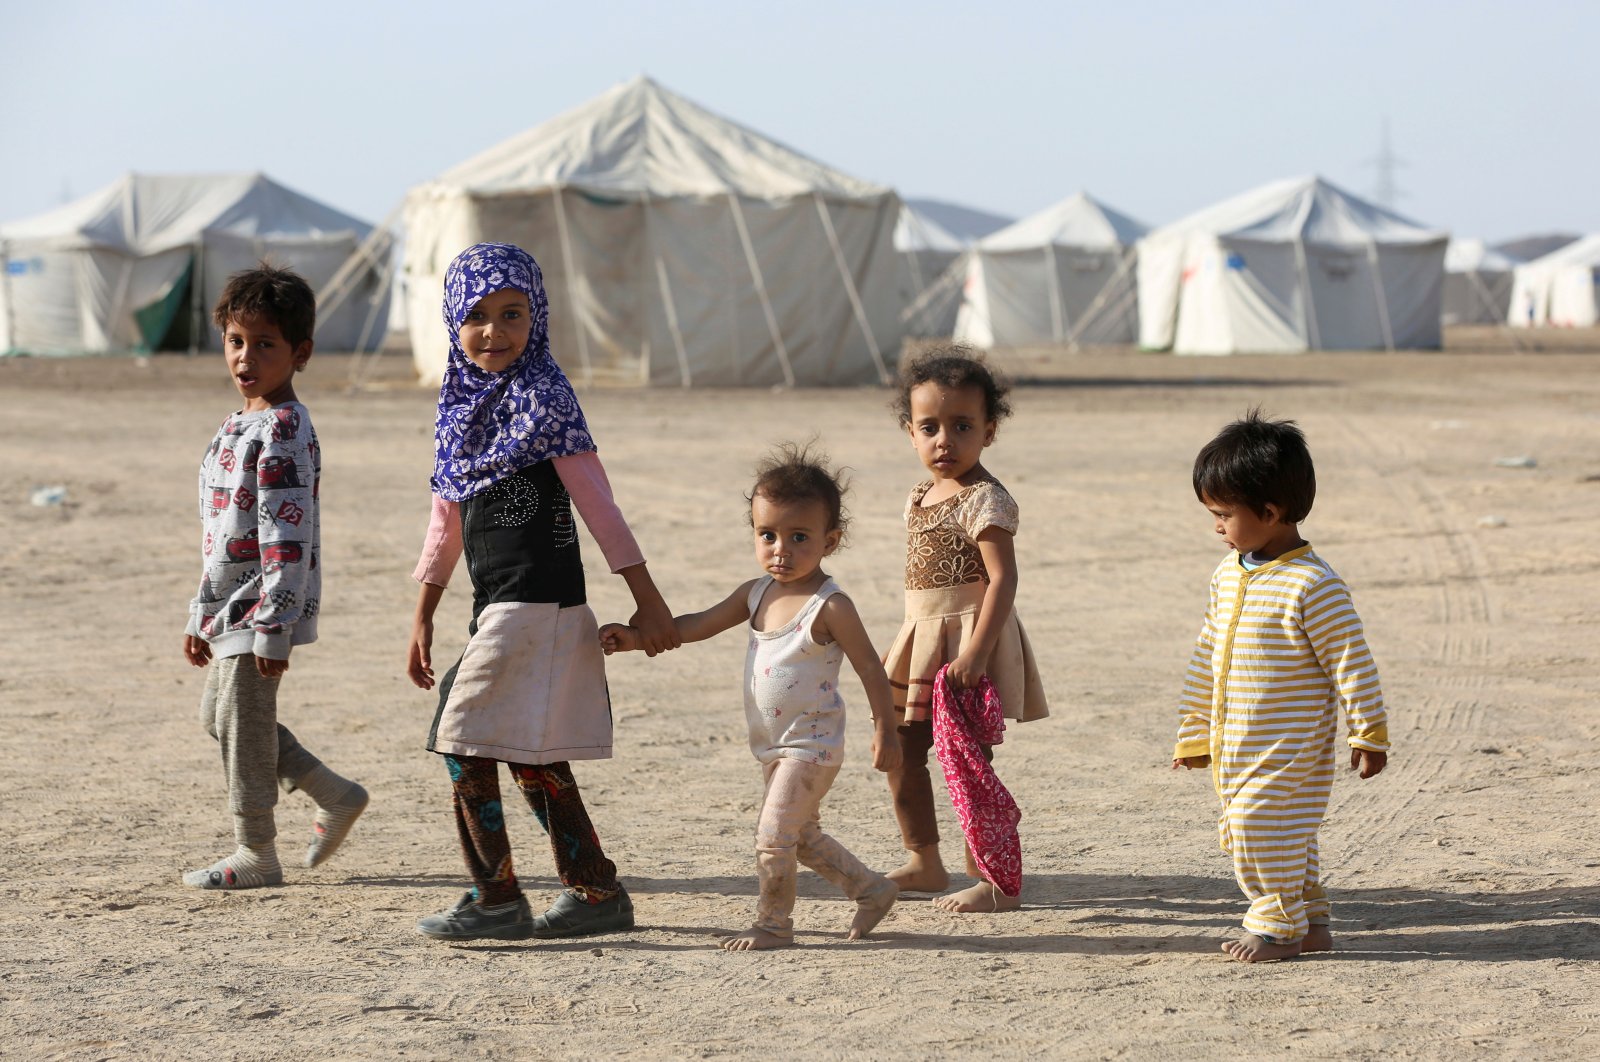 Children walk at a camp for people recently displaced by fighting in Yemen's northern province of al-Jawf between government forces and Houthis, in Marib, Yemen March 8, 2020. (Reuters Photo)